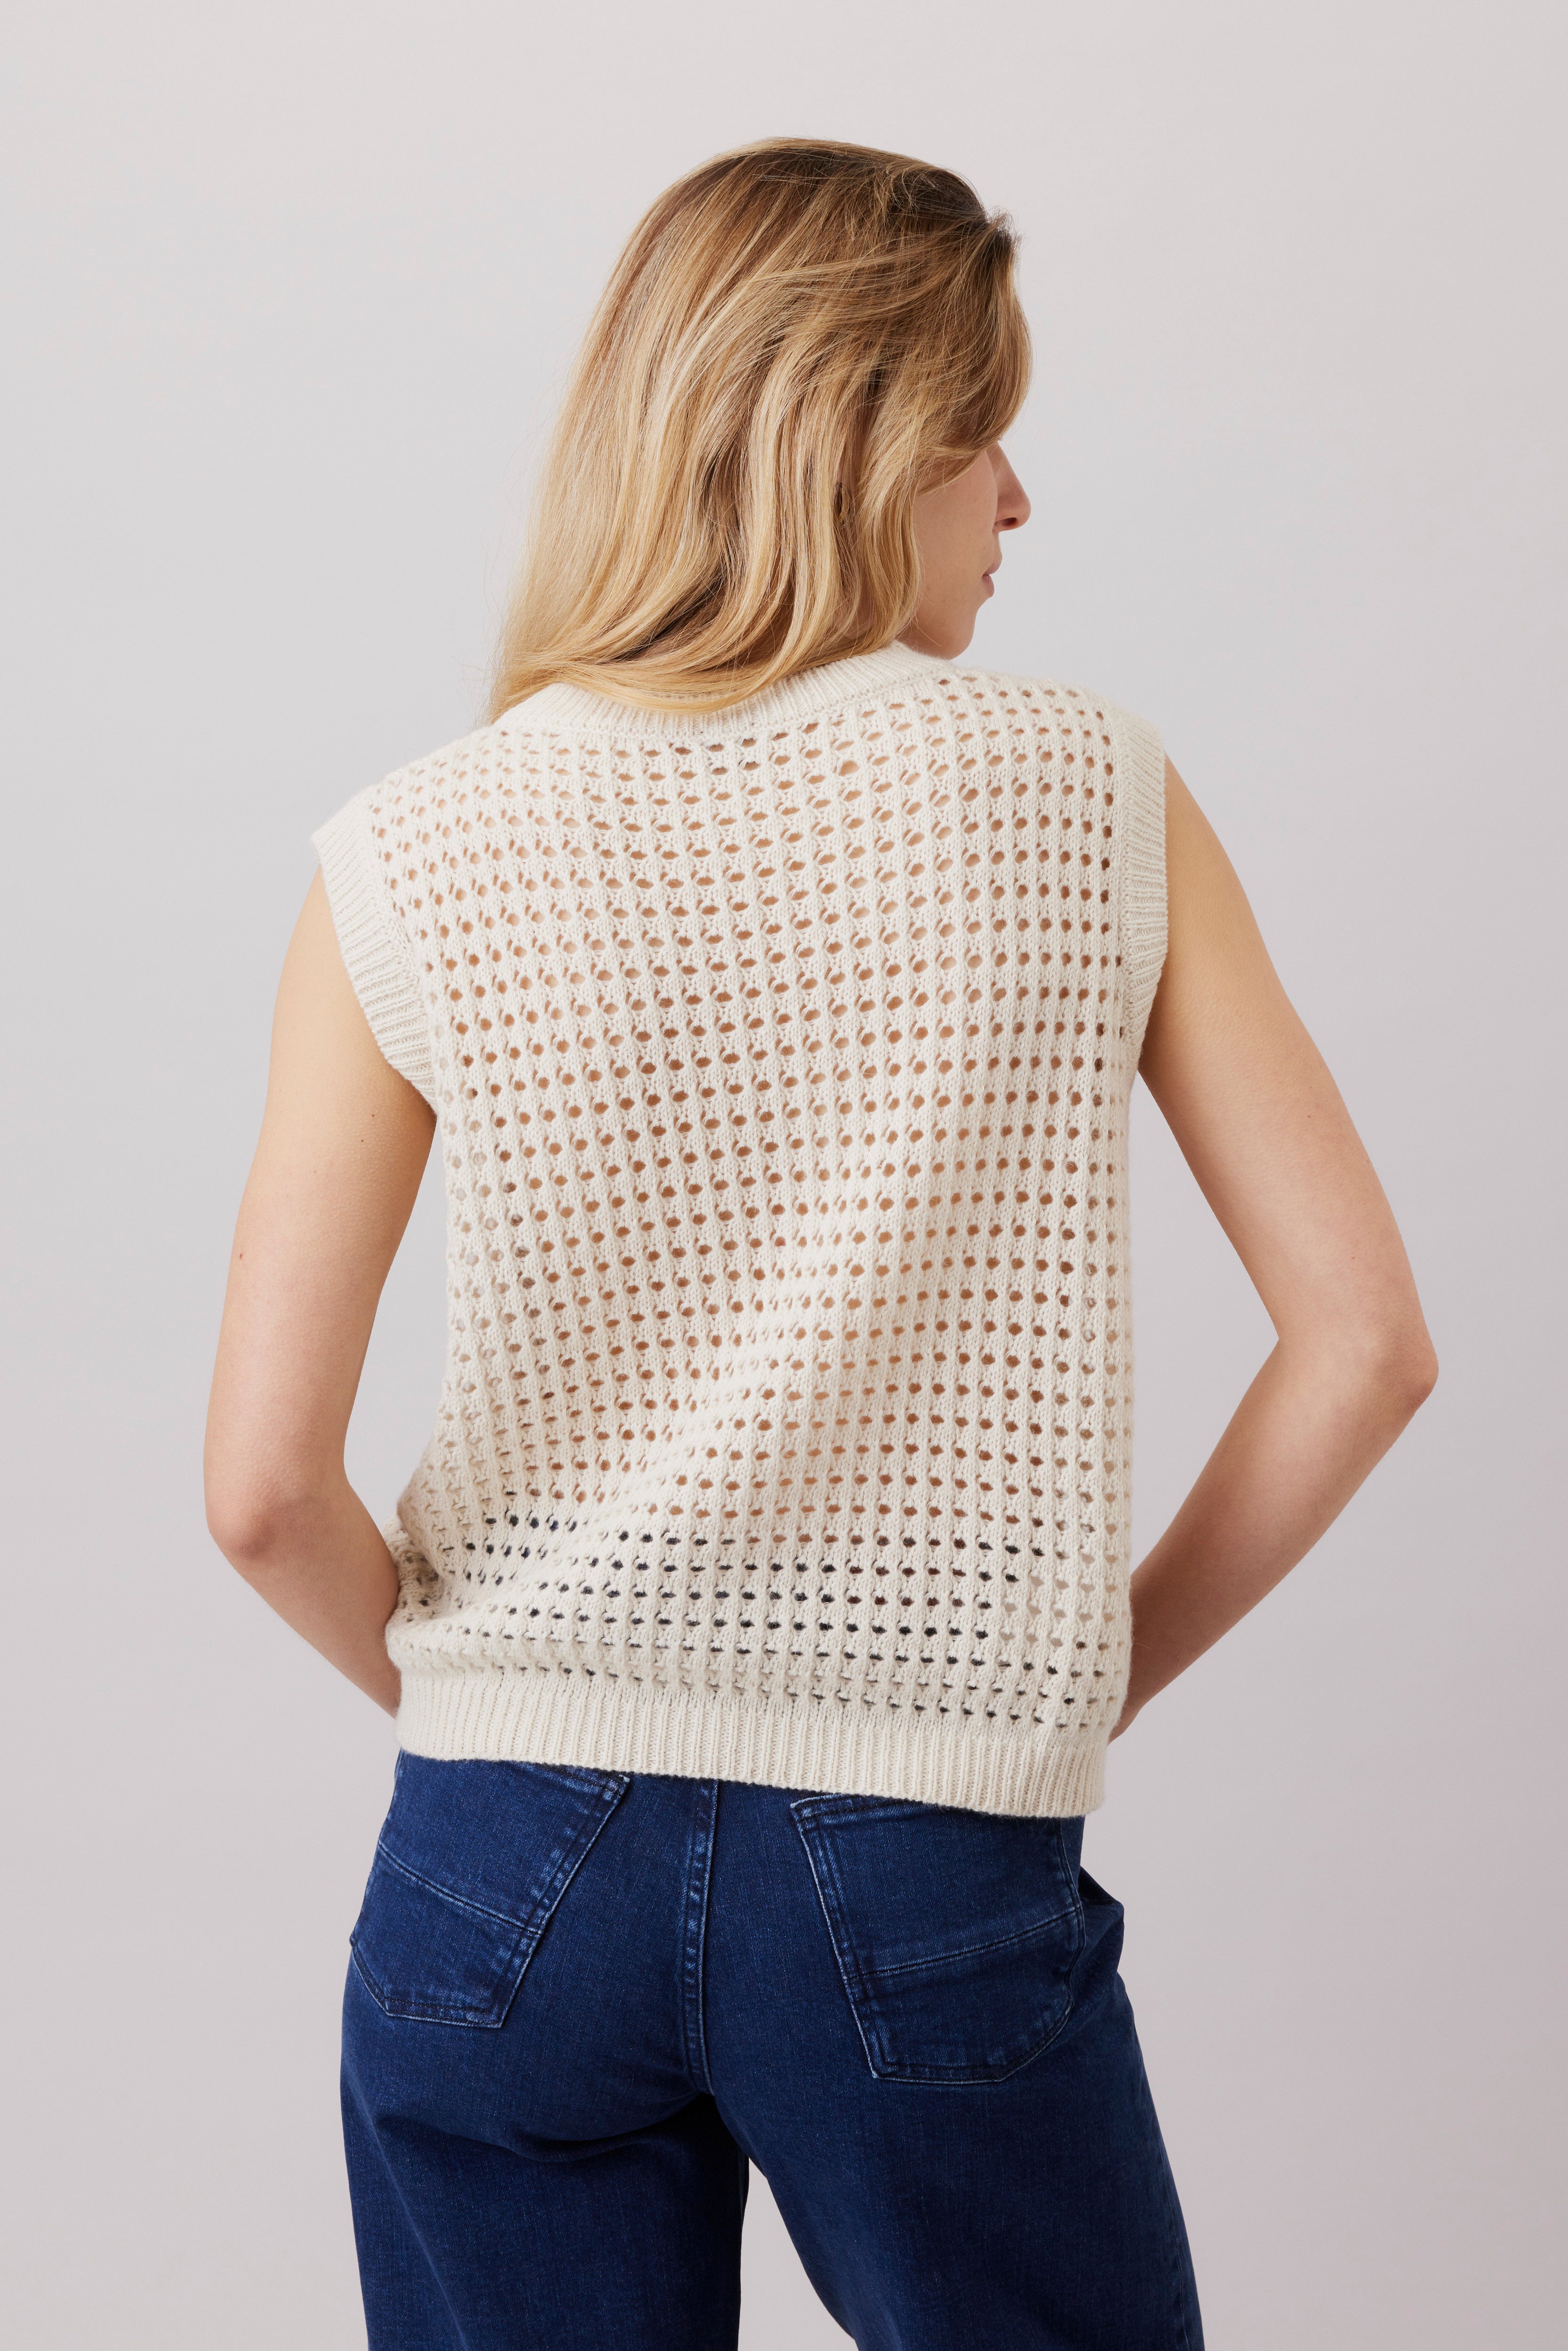 Crochet Sweater with Cashmere